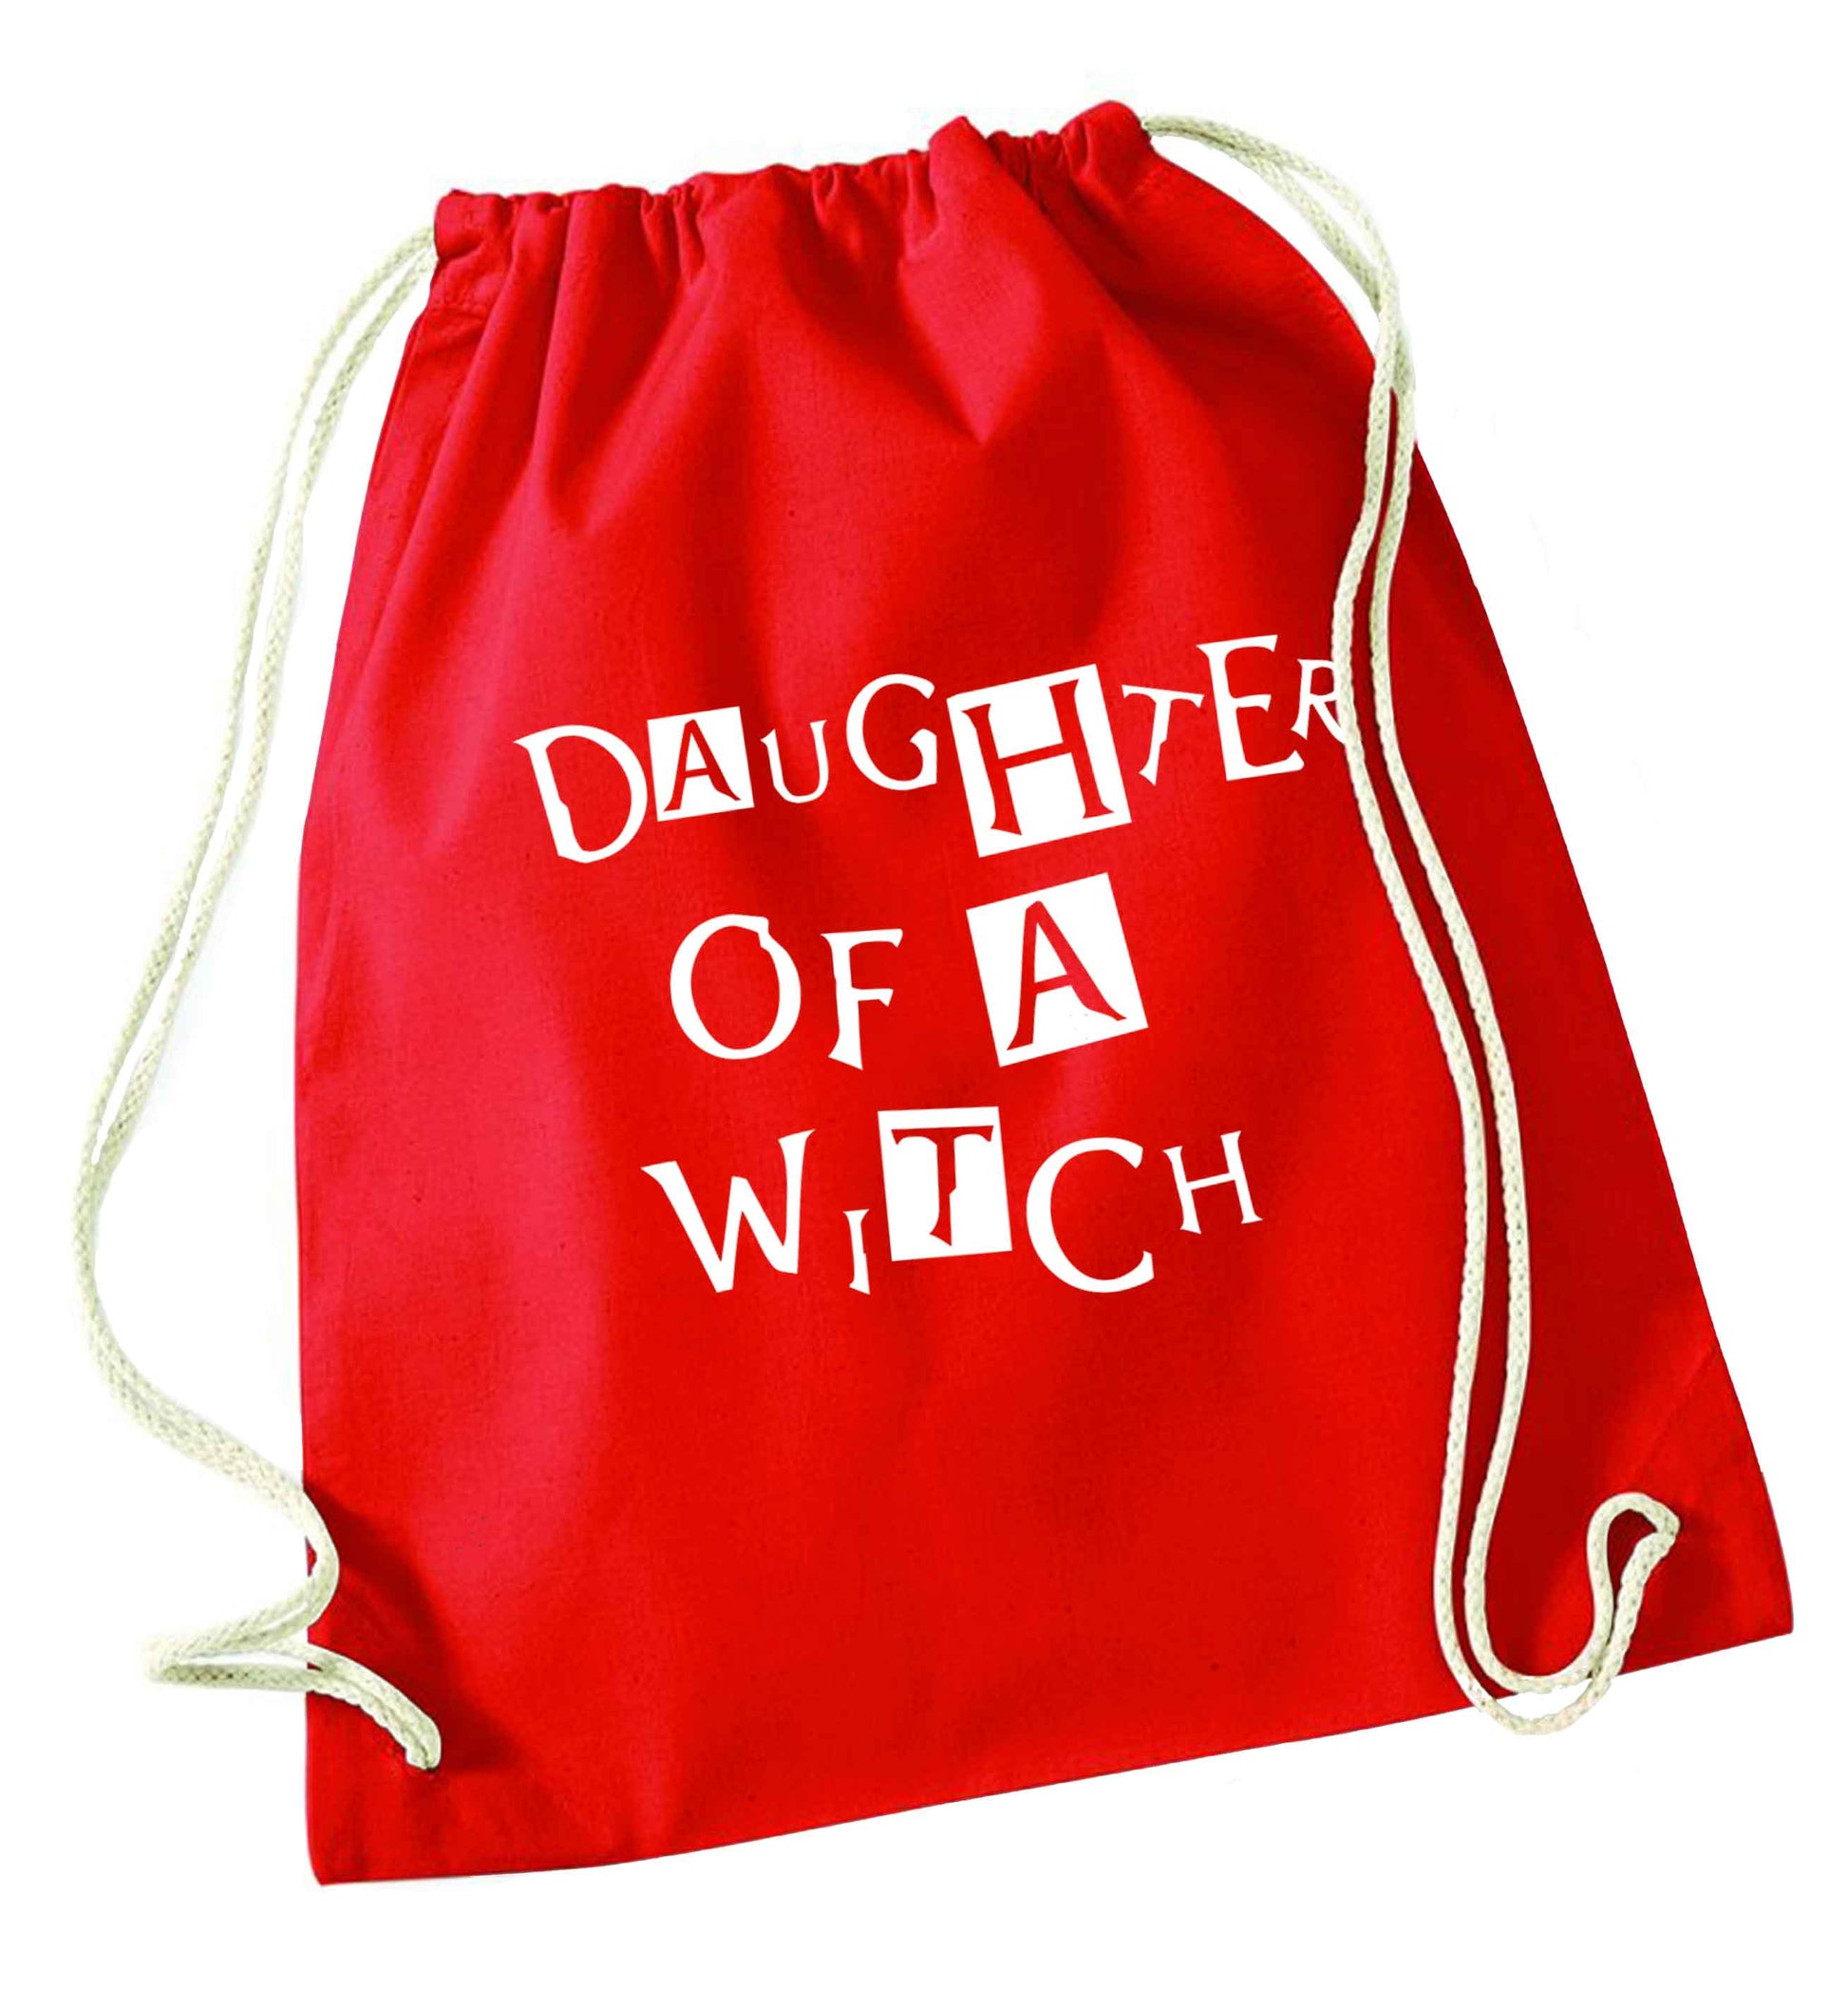 Daughter of a witch red drawstring bag 